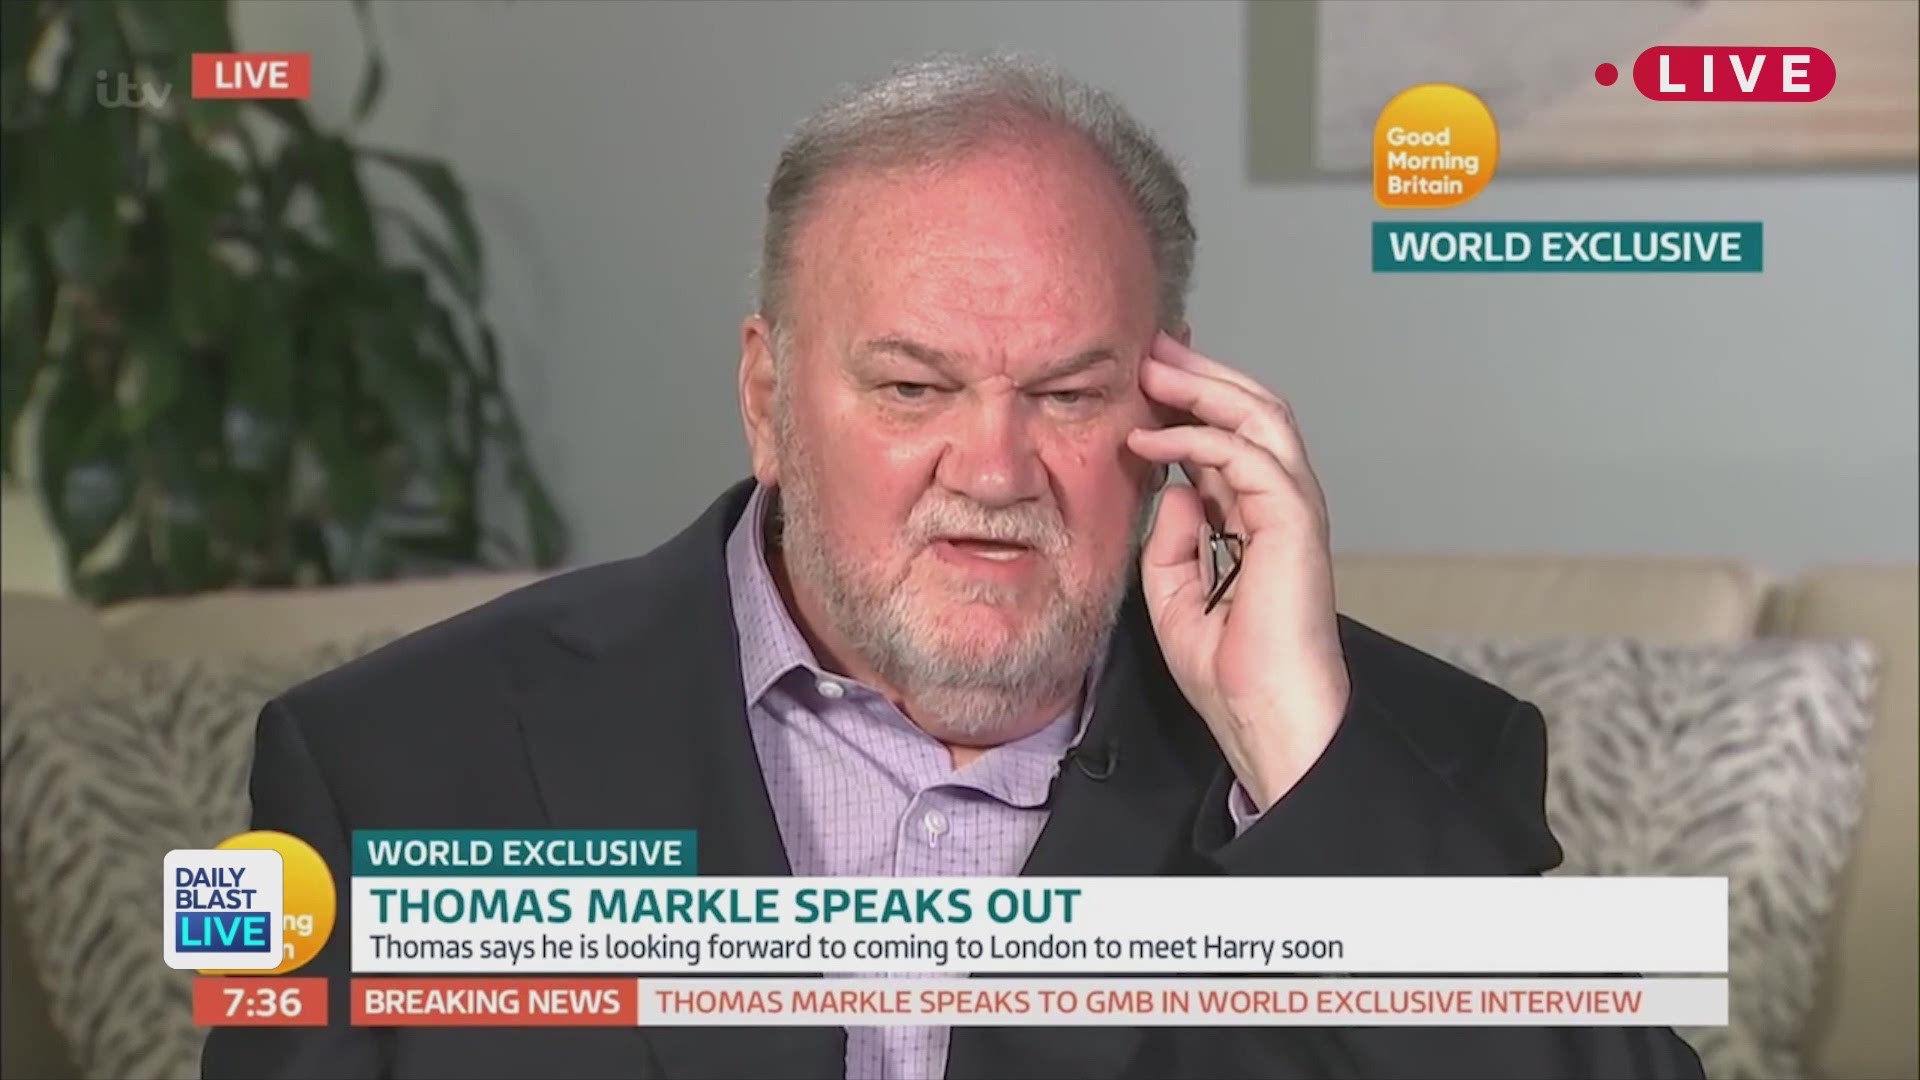 A royal scandal is just waiting to happen thanks to the Markle family. Meghan's semi-estranged father, Thomas Markle, has spoken out in his first interview since the royal wedding on May 19th. From selling photographs to tabloids to not regretting missing